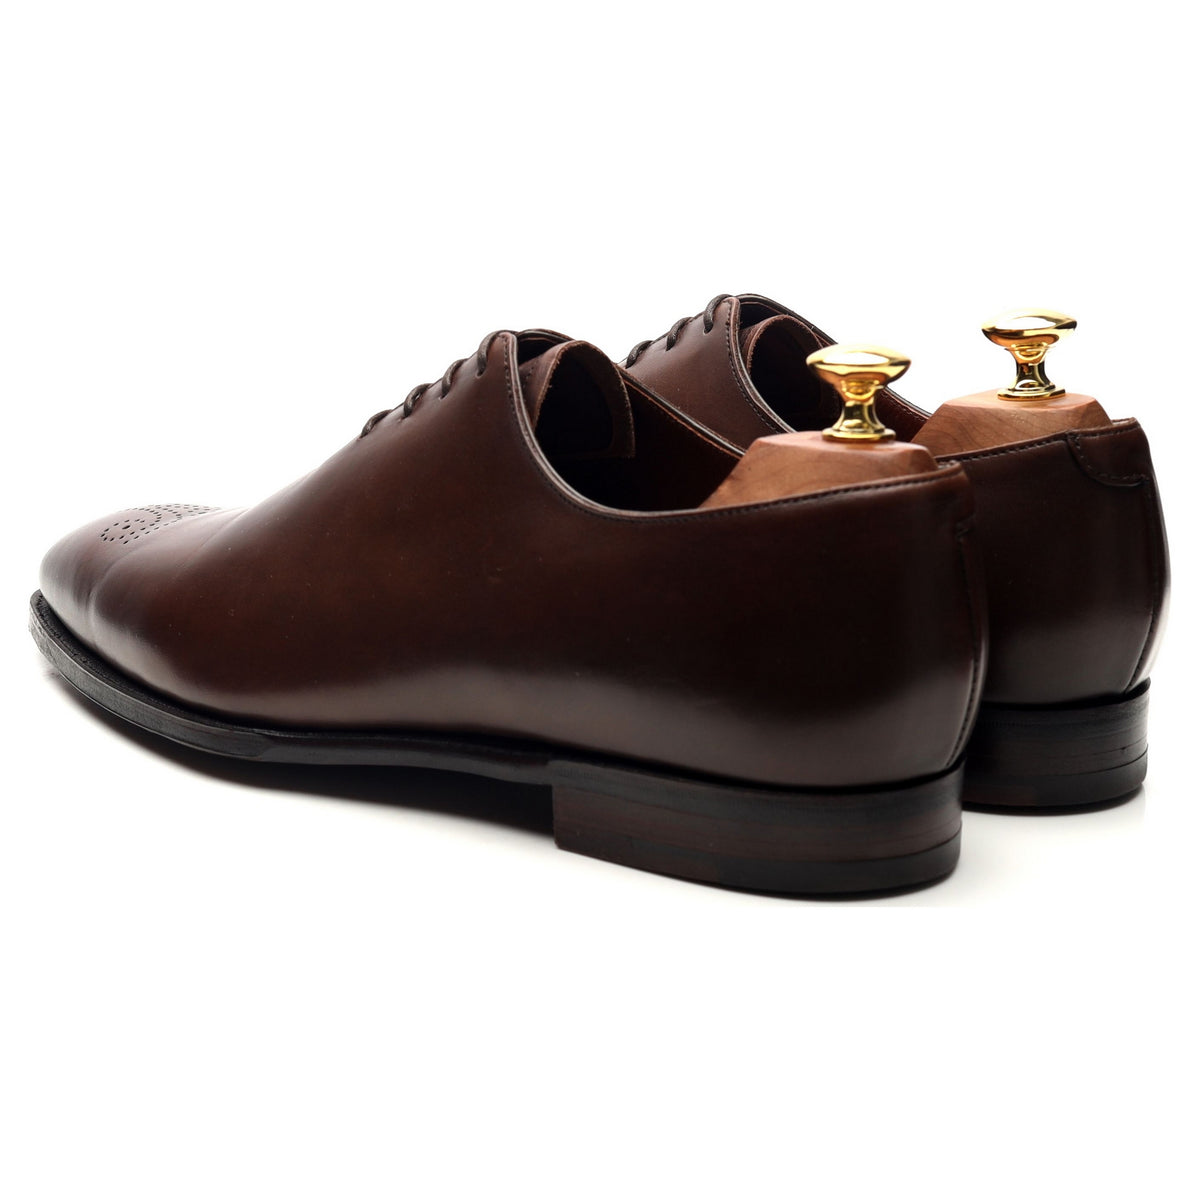 'Weymouth' Brown Leather Oxford UK 9 E - Abbot's Shoes